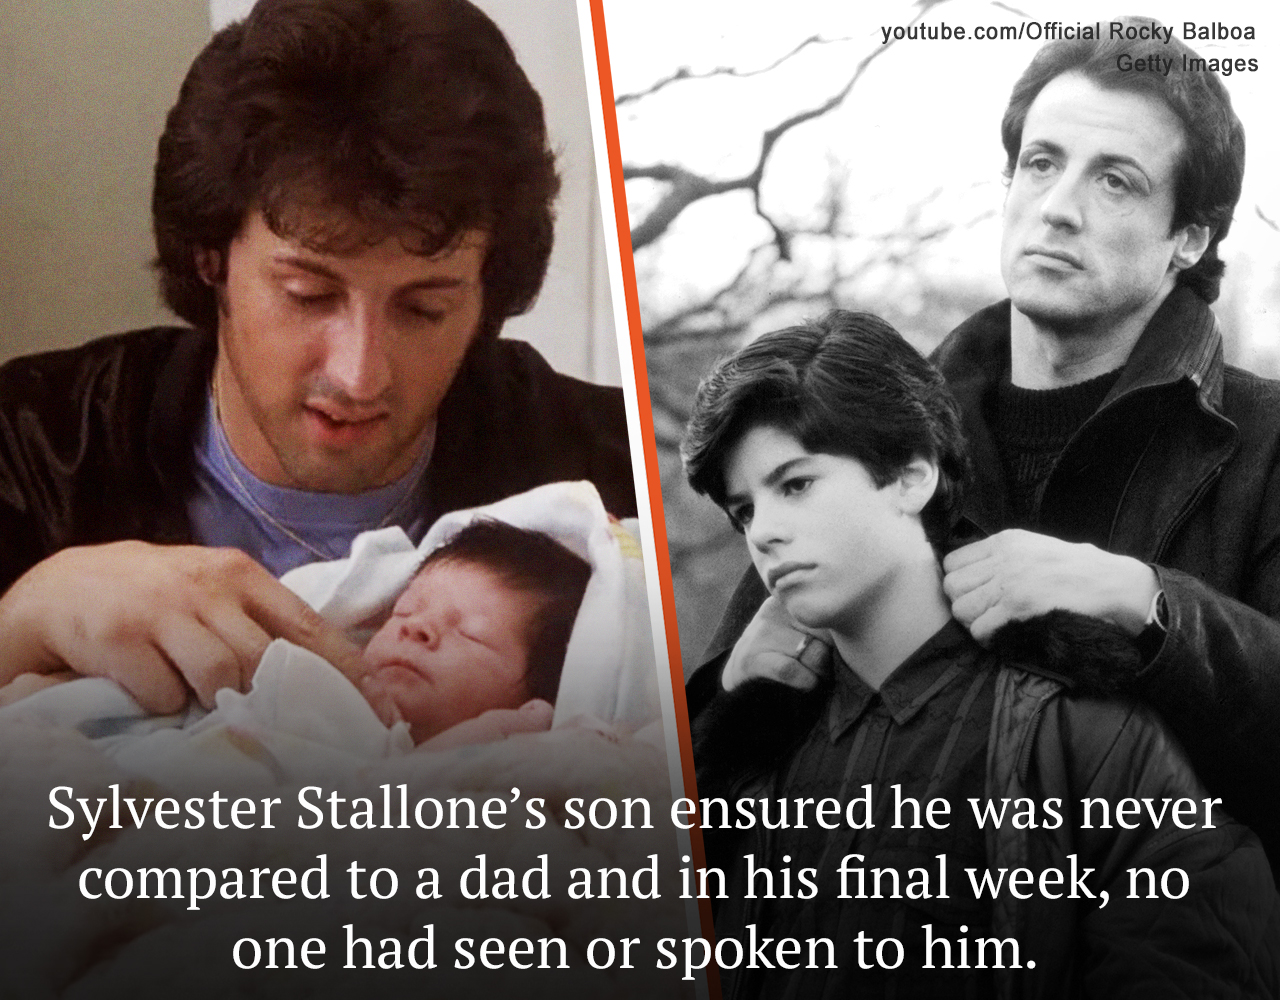 Sage Stallone Sylvester Stallones Firstborn Had “his Whole Life